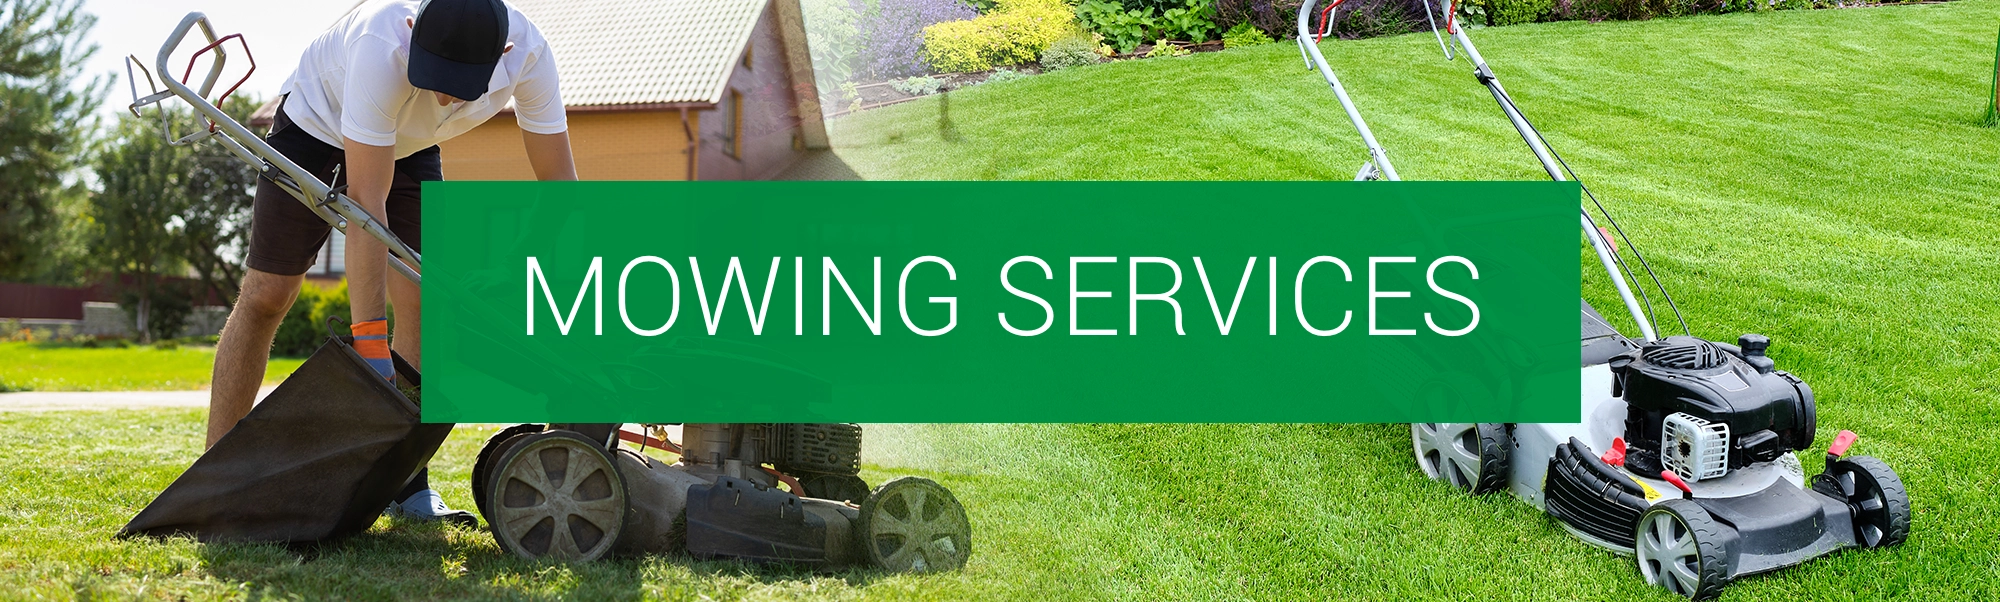 Lawn Care Services in Oklahoma - Mowing